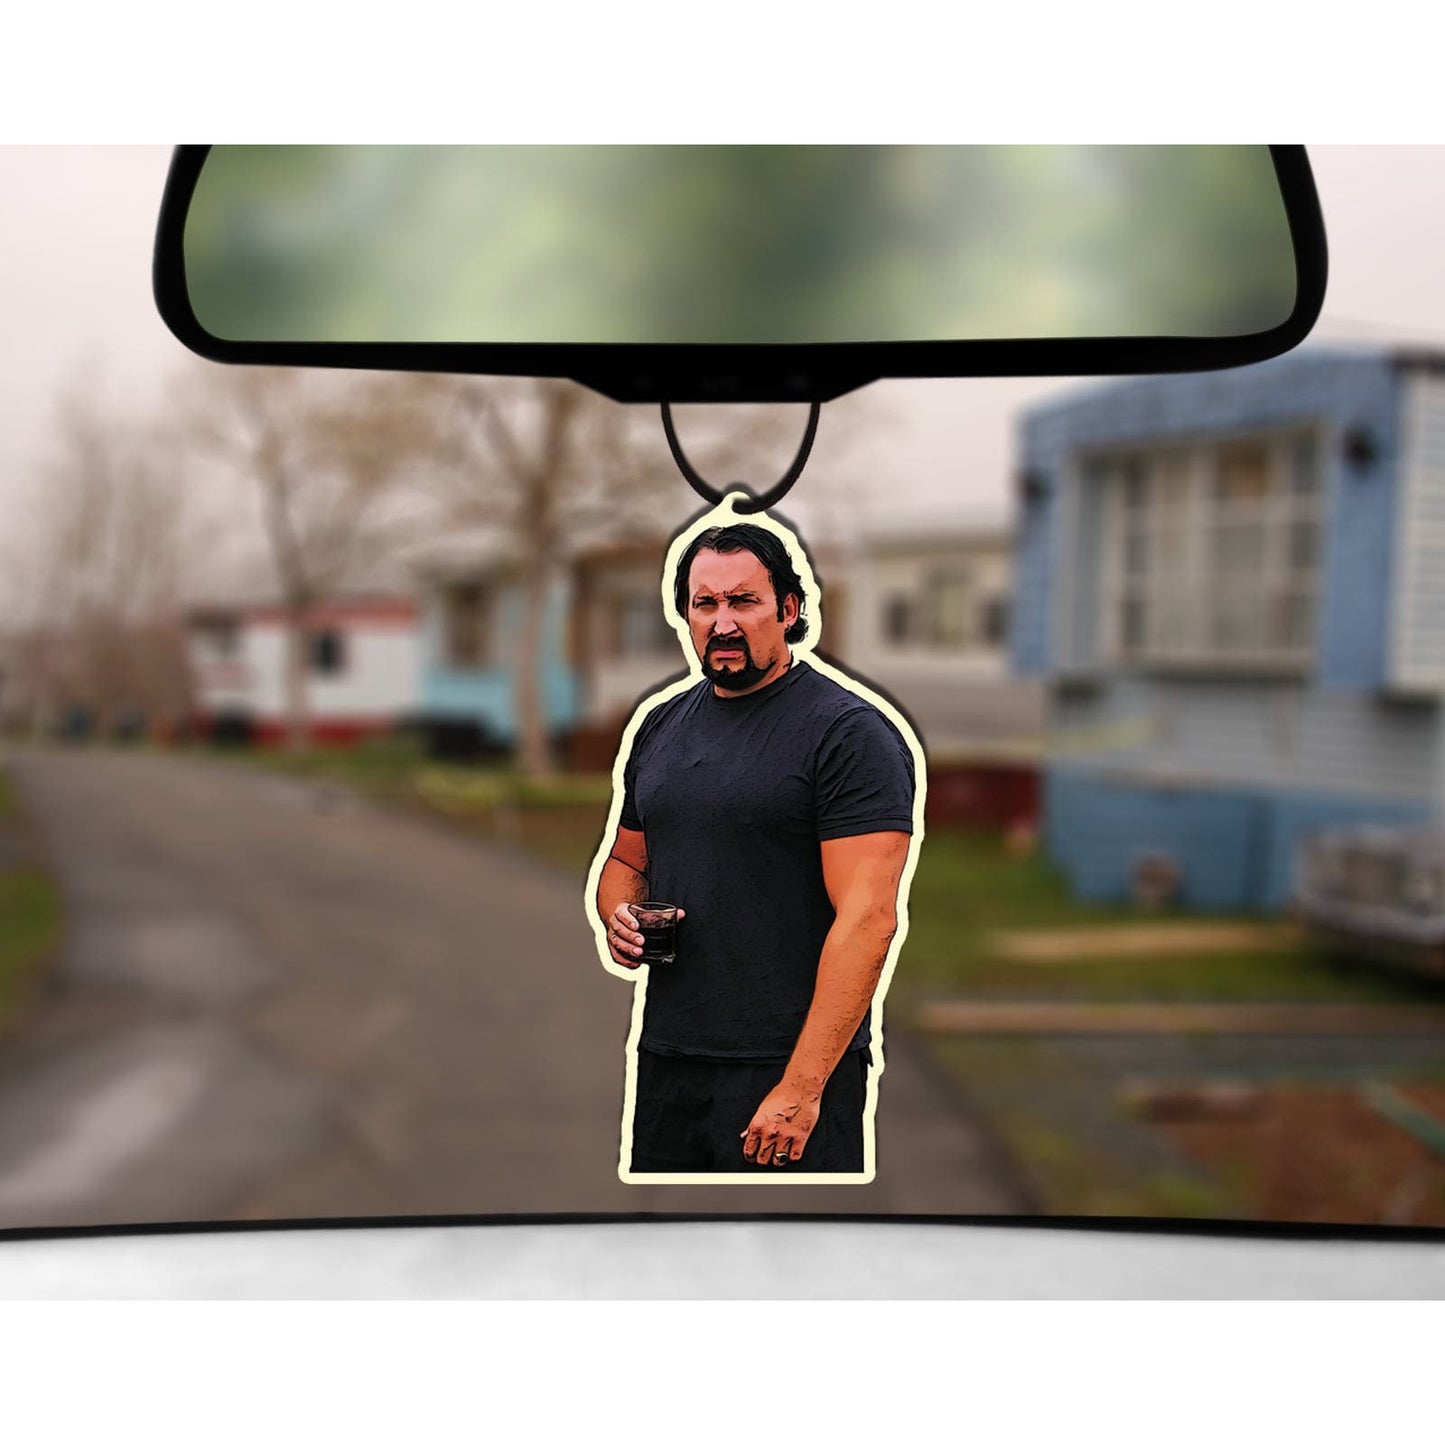 Trailer Park Boys Funny Car Air Freshener 3 Pack w Bubbles, Ricky, Julian | Officially Licensed Hanging Car Air Fresheners